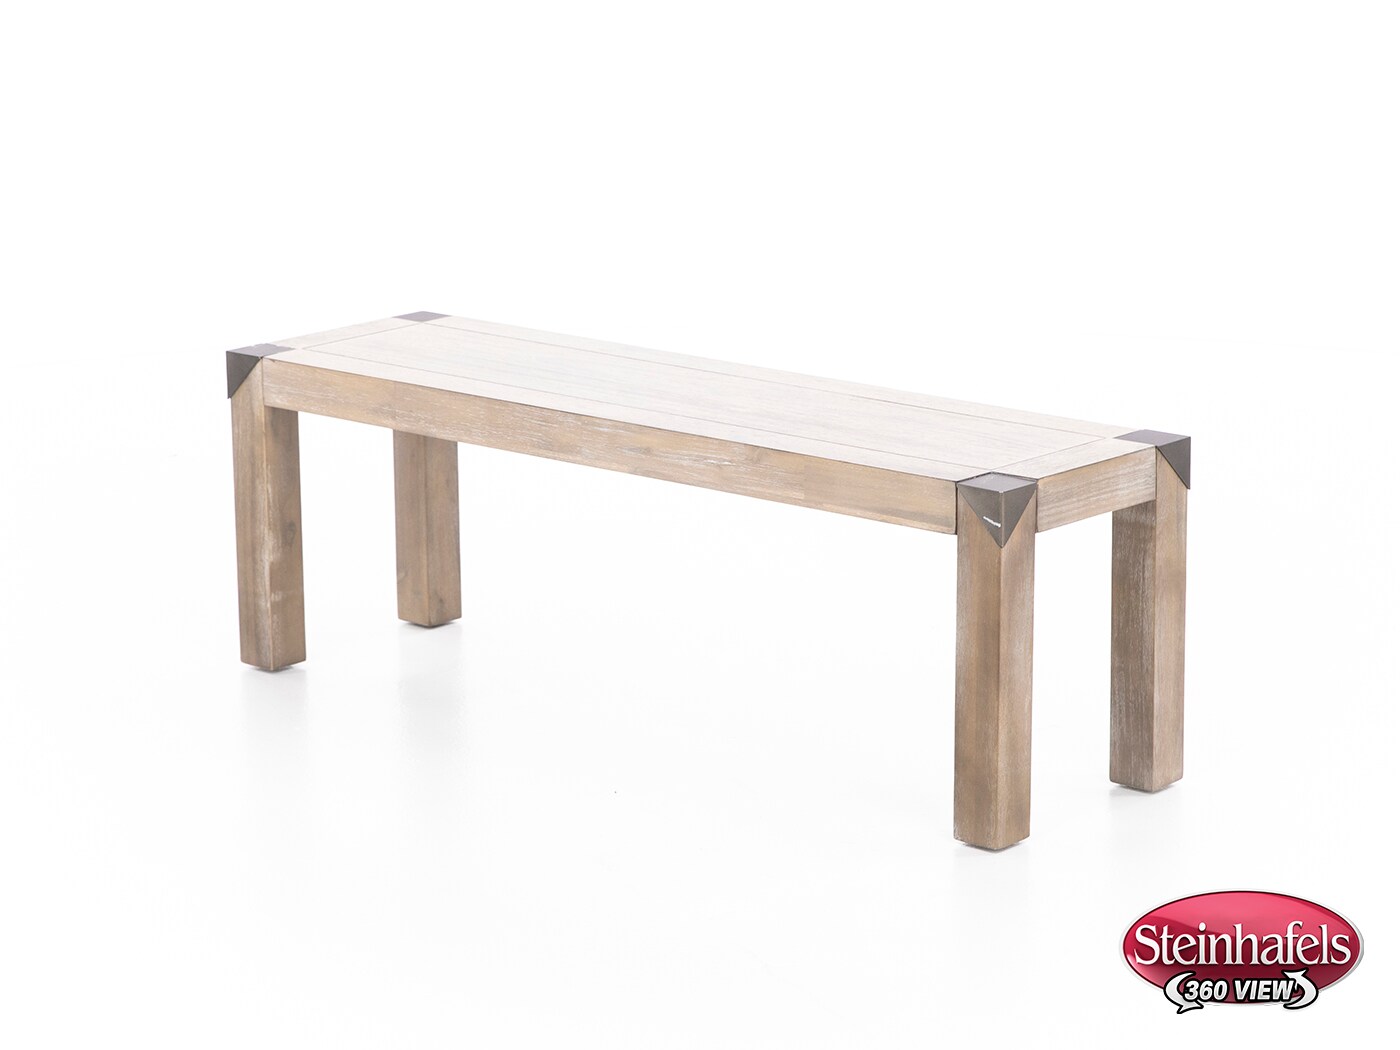 magp brown inch standard seat height bench  image   